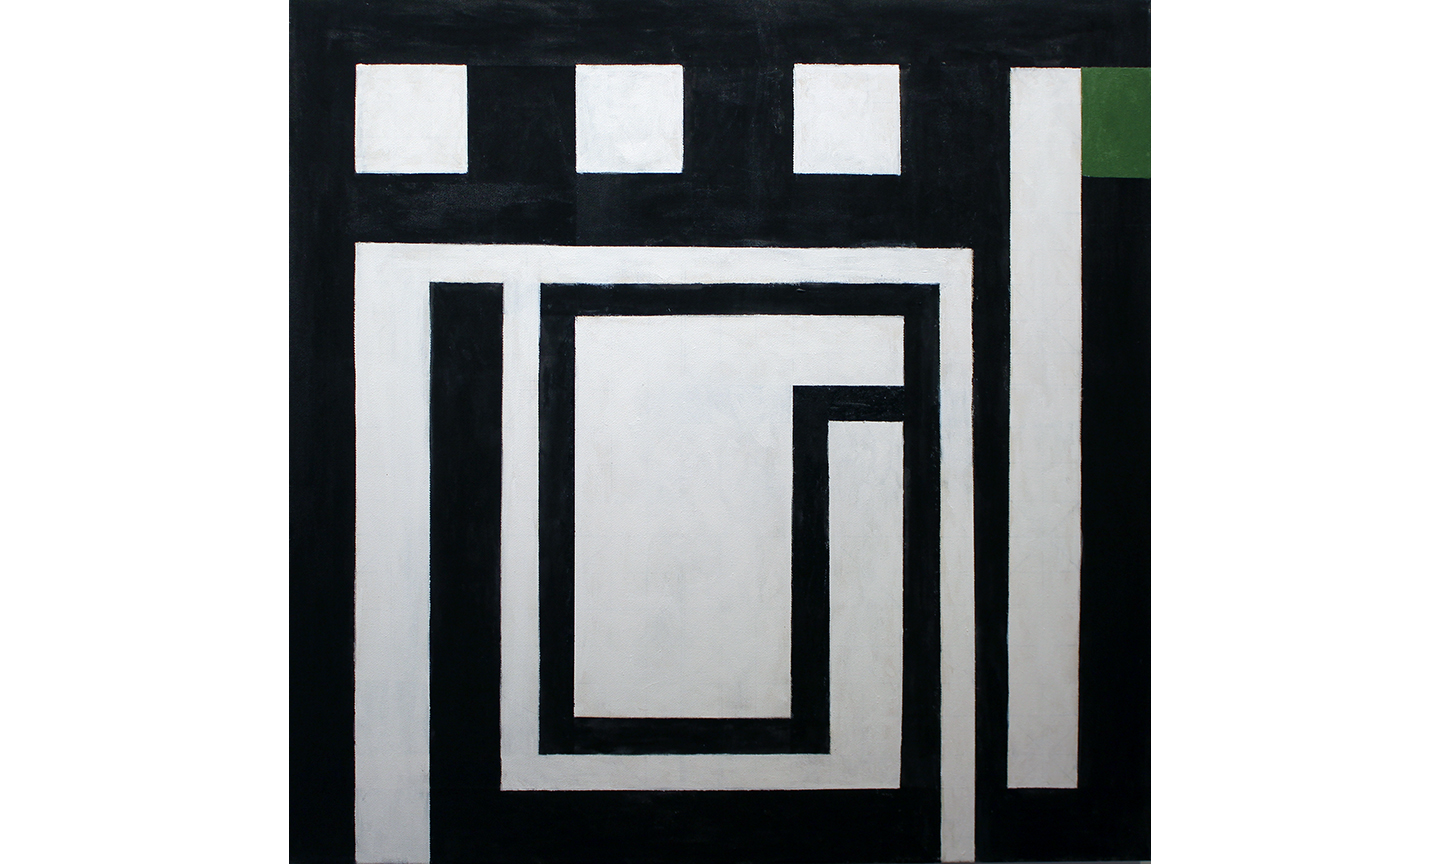 Ludwig, A Touch of Green, 2016, Acrylic on Canvas, 35 x 35 inches, $2,500.jpg